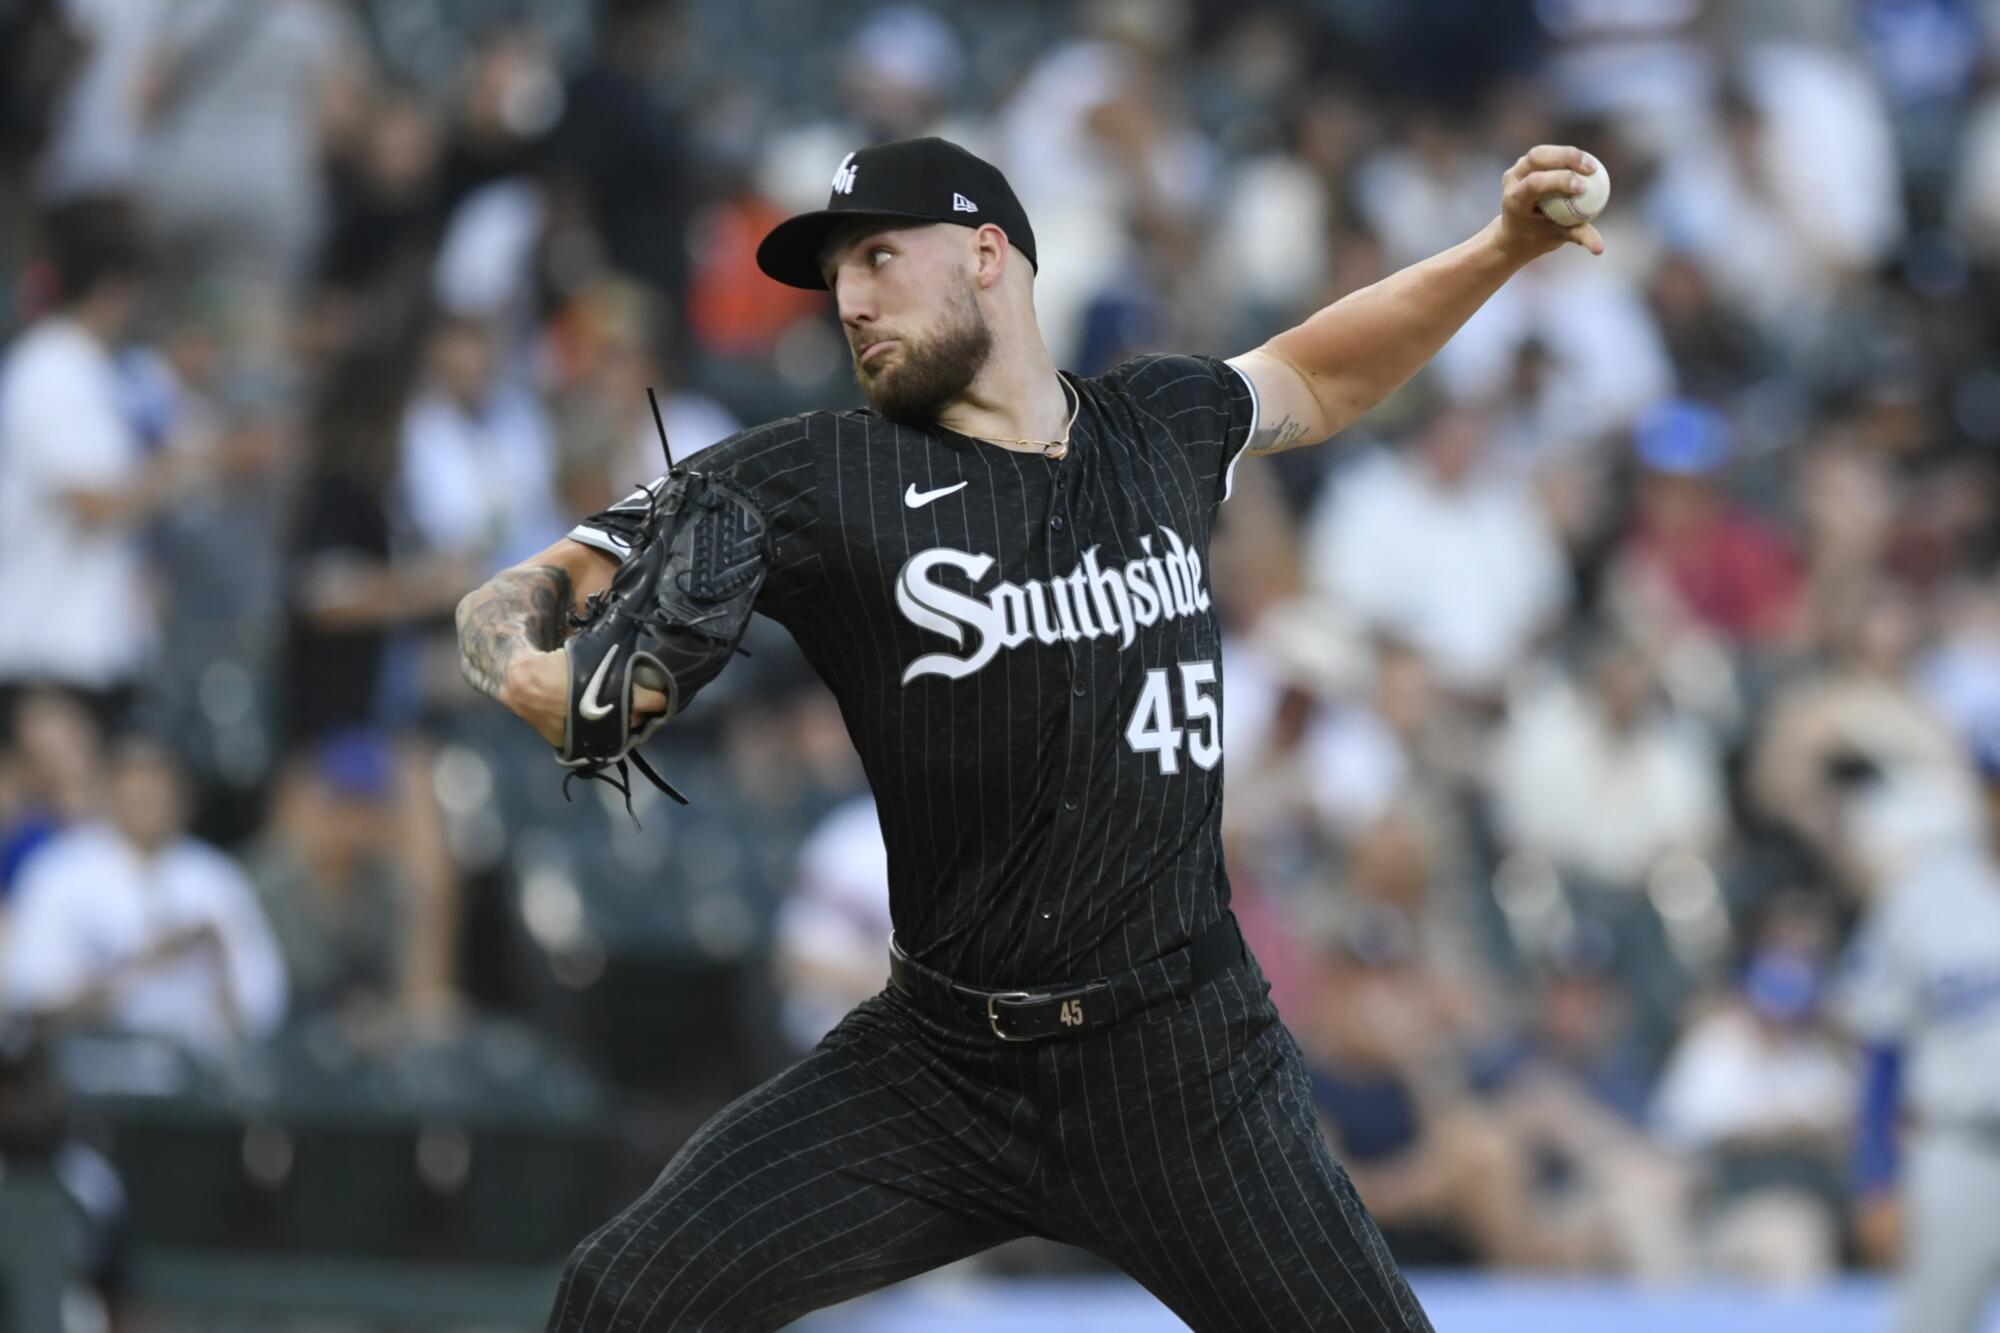 White Sox starter Garrett Crochet is a potential option for the Dodgers to help them upgrade their rotation at the deadline.